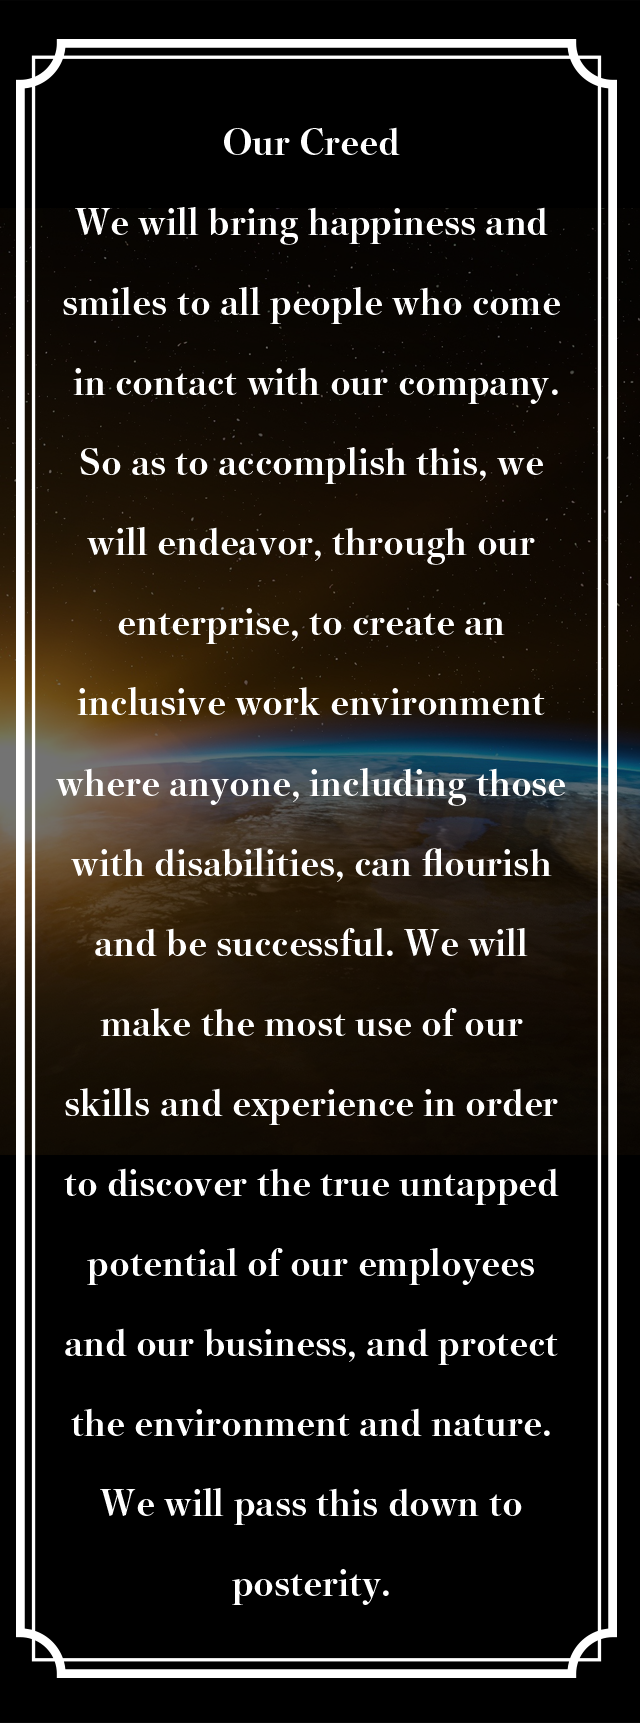 Our Creed We will bring happiness and smiles to all people who come in contact with our company.So as to accomplish this, we will endeavor, through our enterprise, to create an inclusive work environment where anyone, including those with disabilities, can flourish and be successful. We will make the most use of our skills and experience in order to discover the true untapped potential of our employees and our business, and protect the environment and nature.
We will pass this down to posterity.
